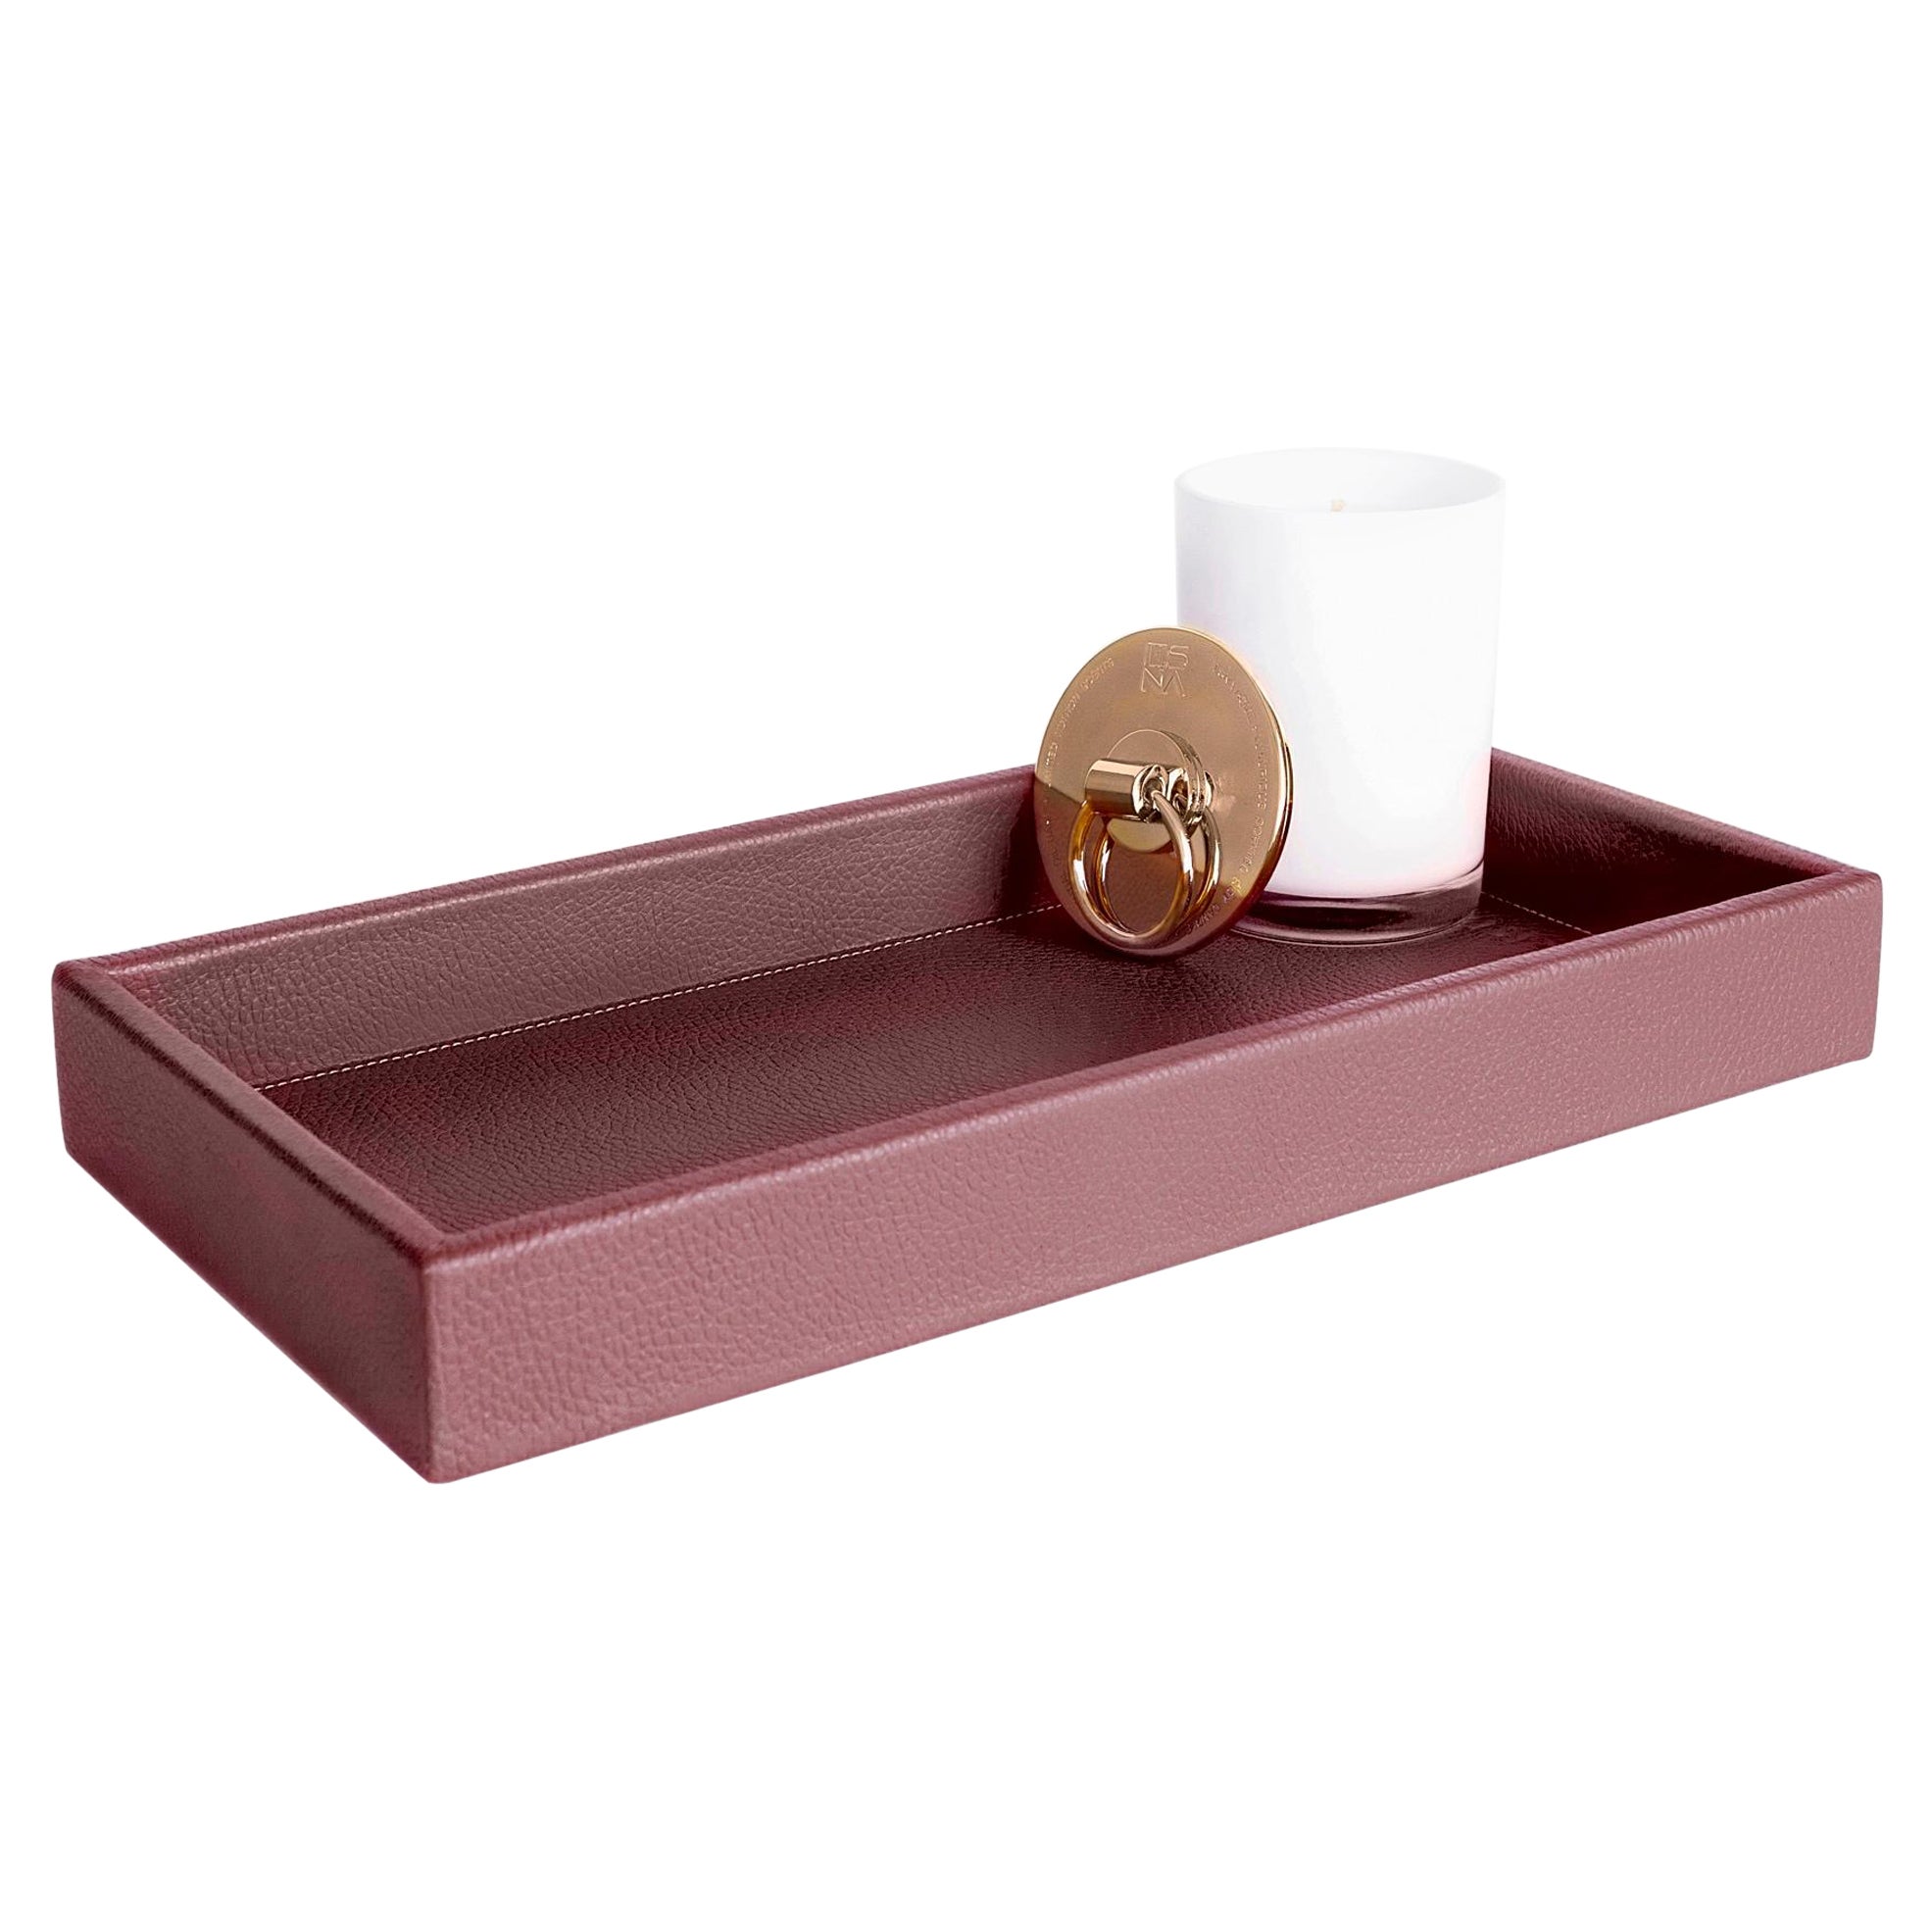 Leather Tray, Medium A Rectangular Tray - Handmade - Color: Wine For Sale